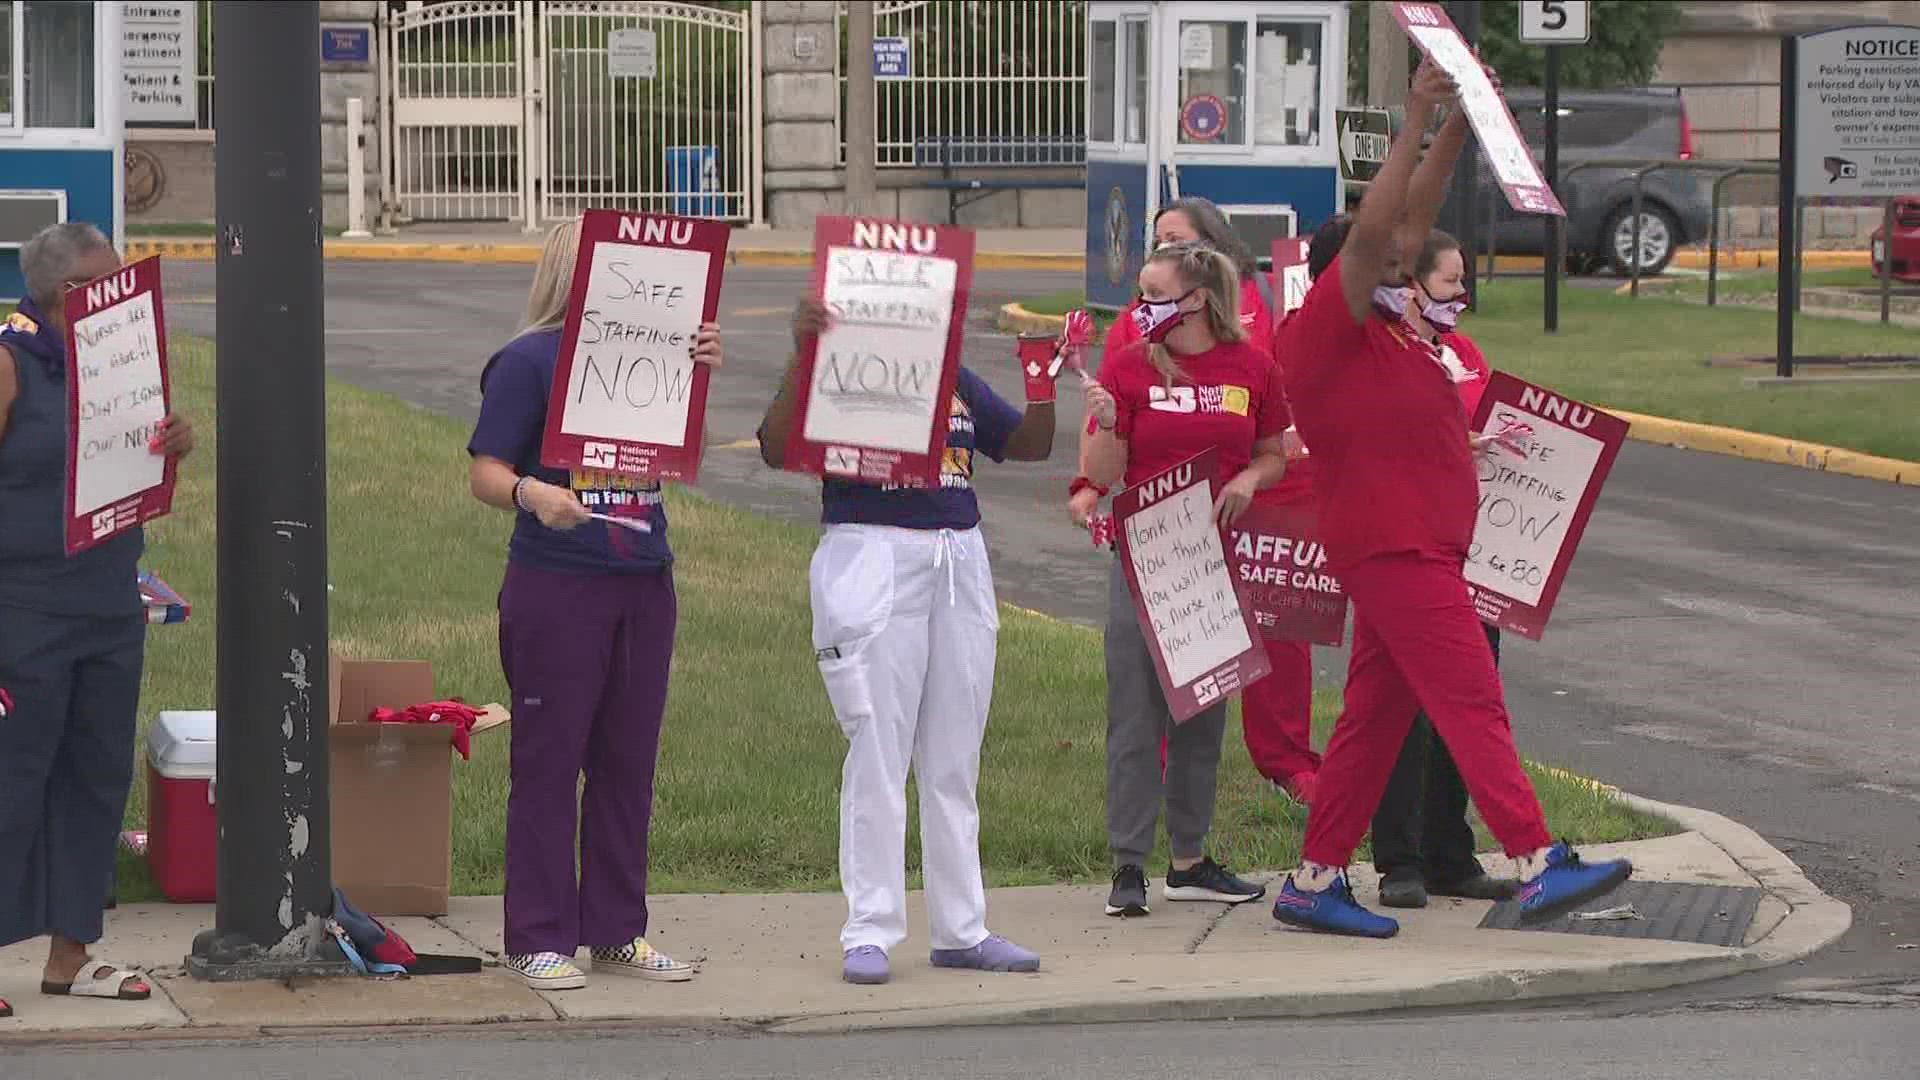 Nurses Protest Working Conditions At VA Hospital